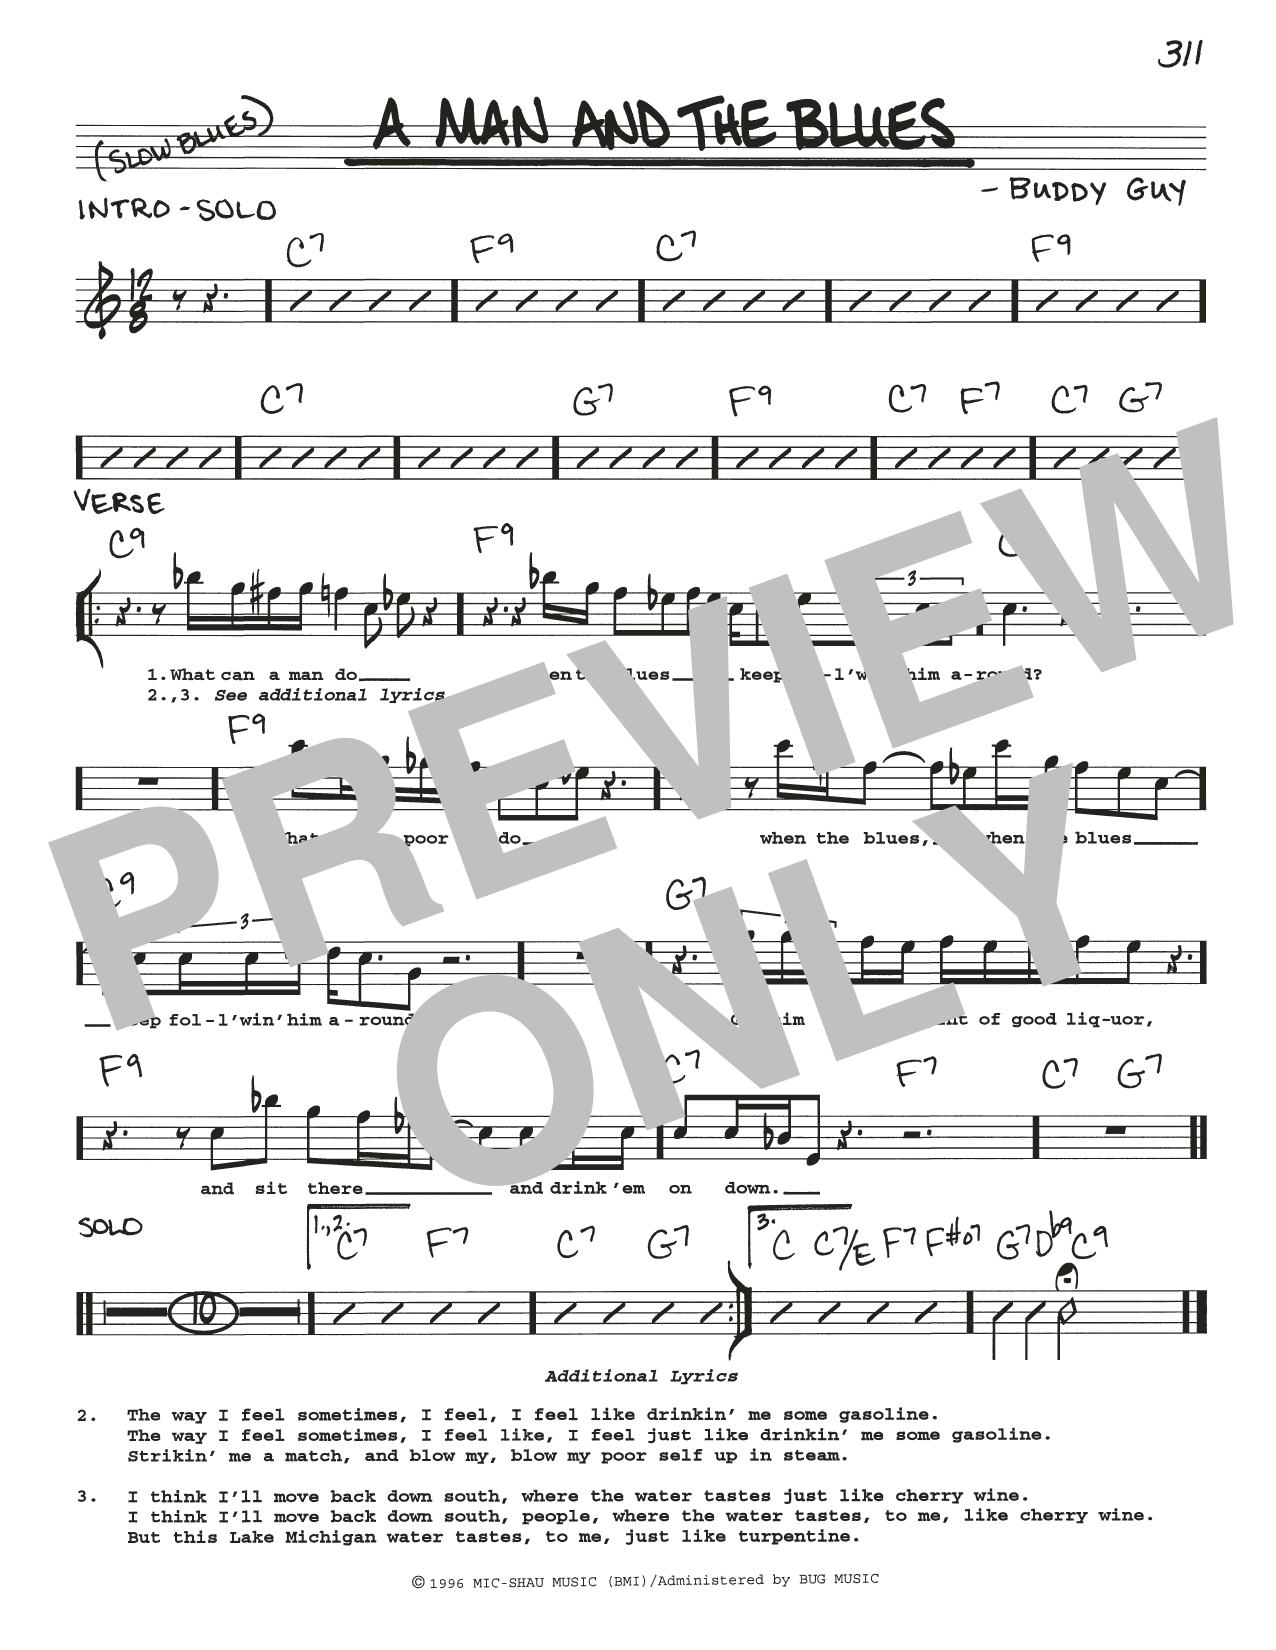 Download Buddy Guy A Man And The Blues Sheet Music